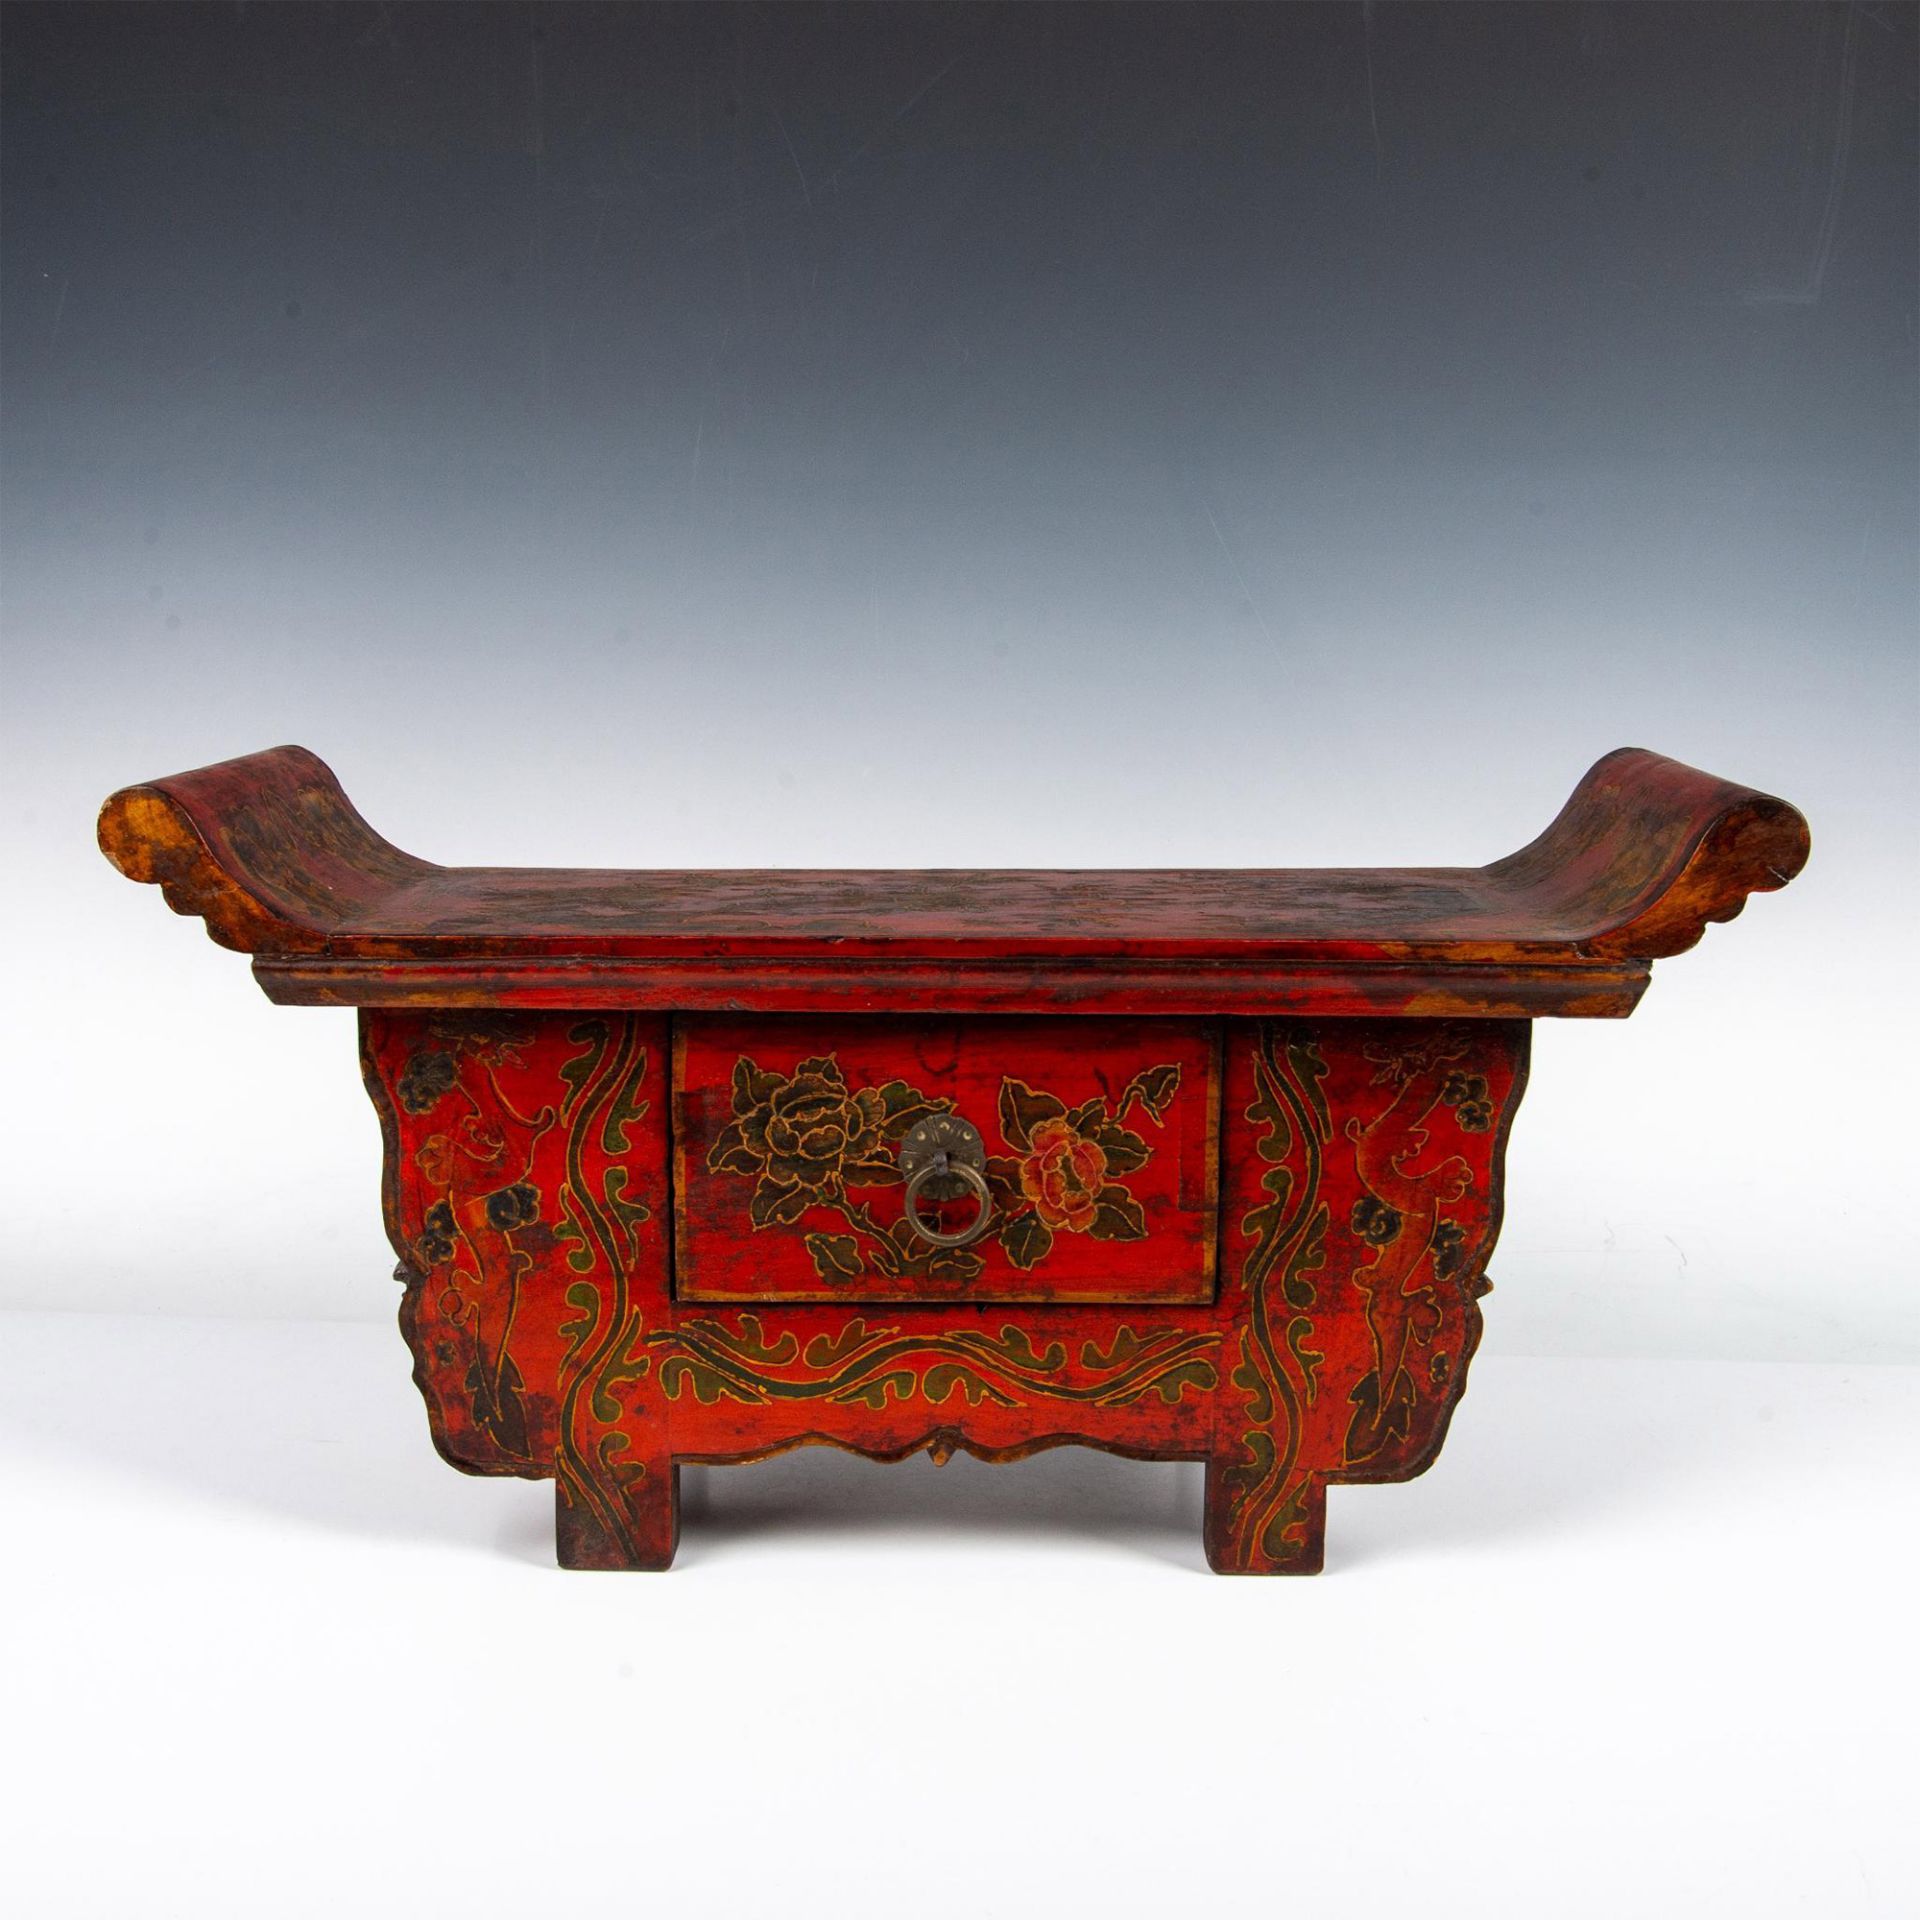 Chinese Petit Wood Altar Stand / Jewelry Chest